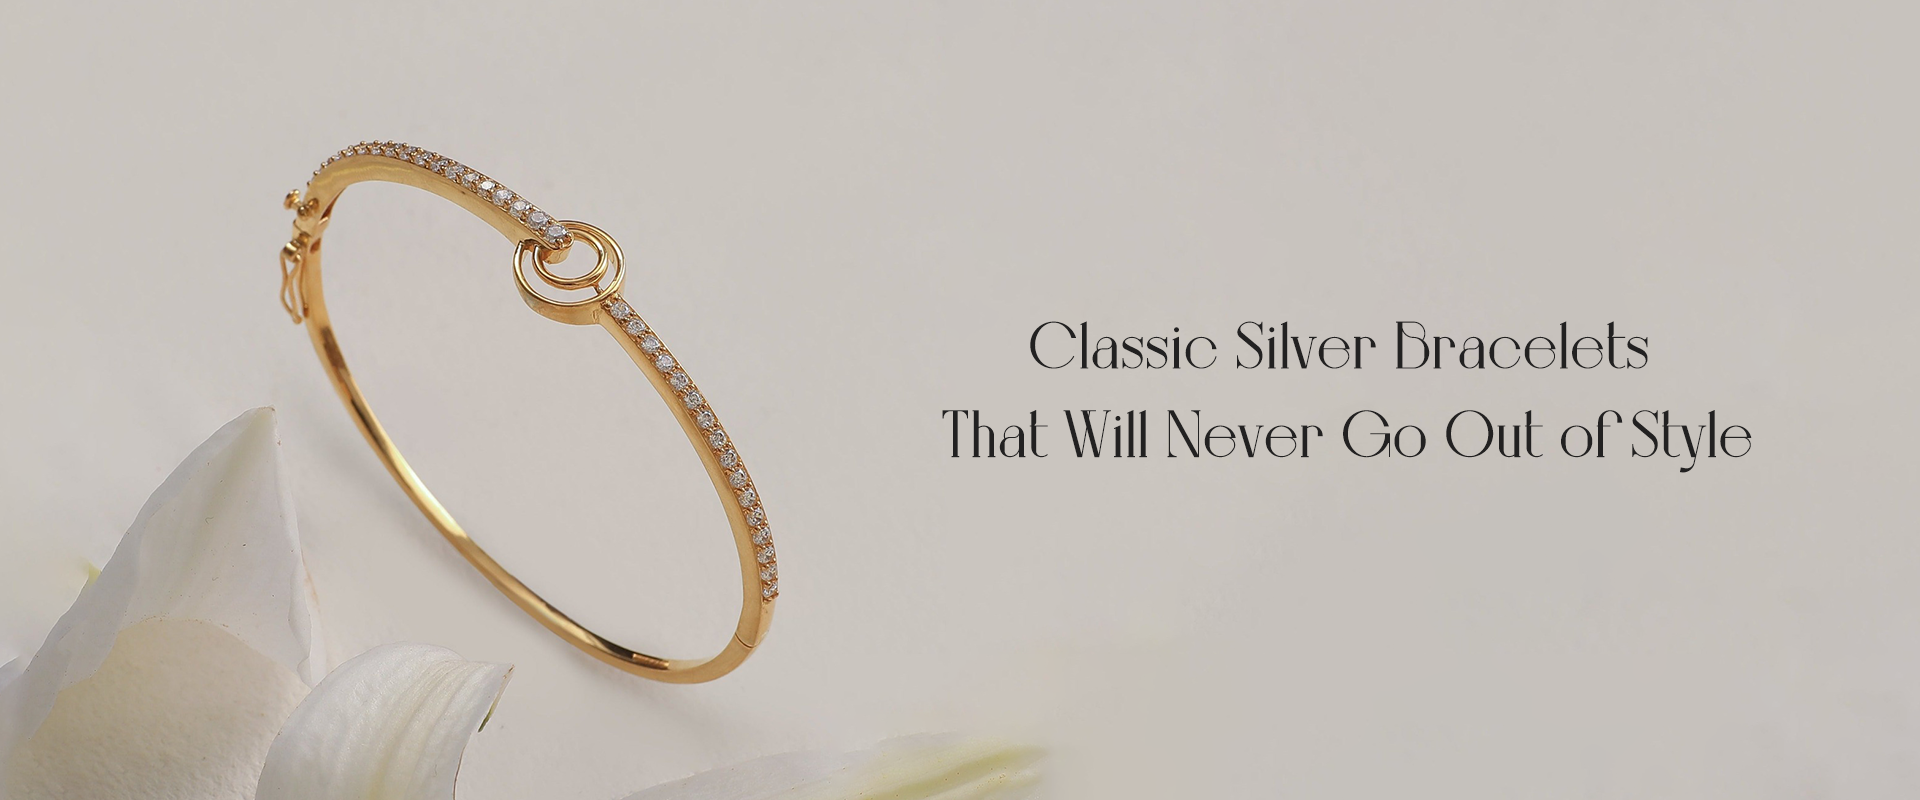 Classic Silver Bracelets That Will Never Go Out of Style